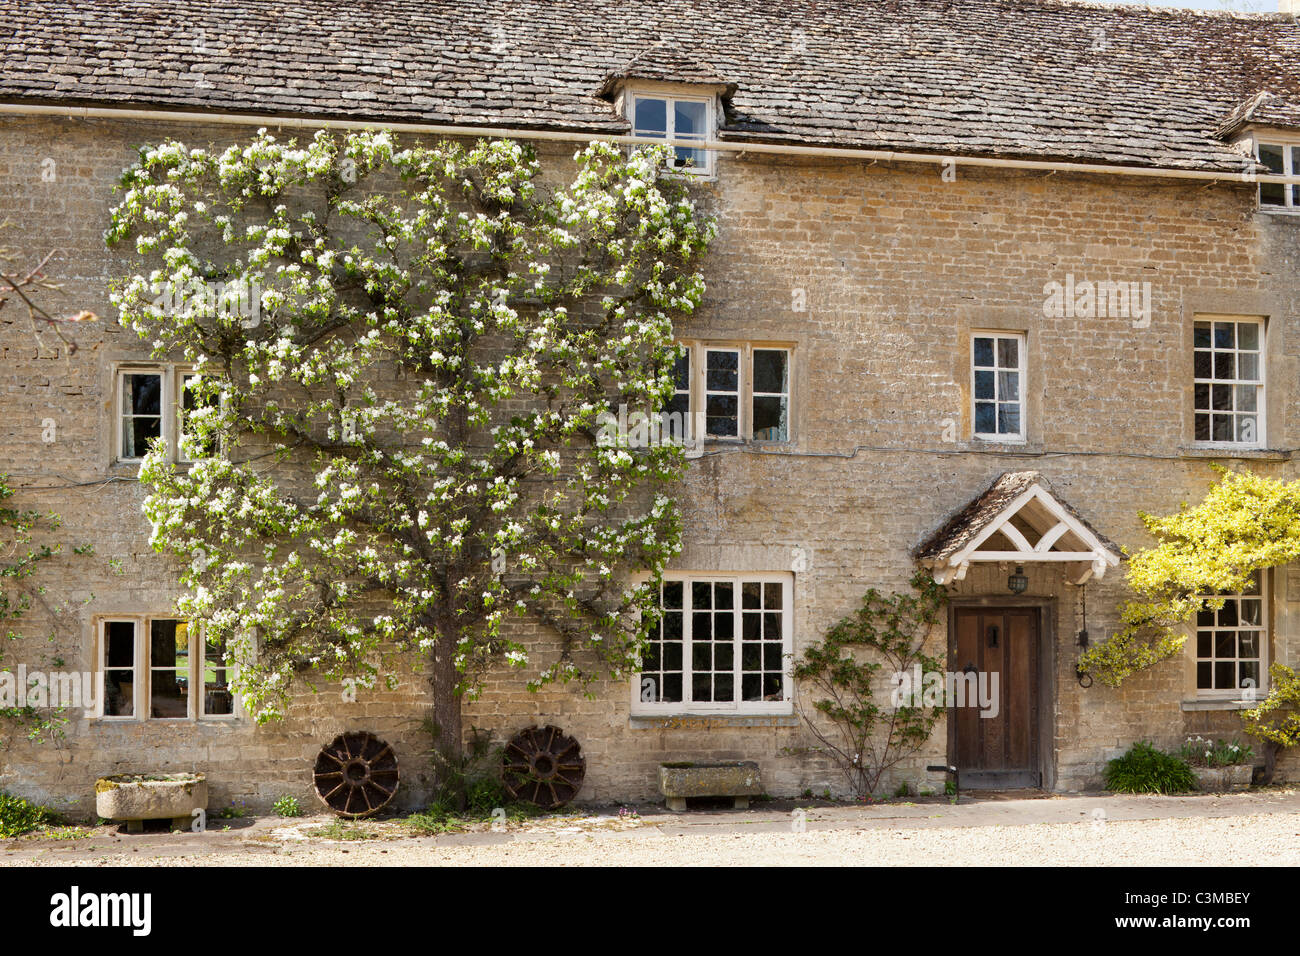 An old pear tree in blossom growing on Winson Mill in the Cotswold village of Winson, Gloucestershire, England UK Stock Photo